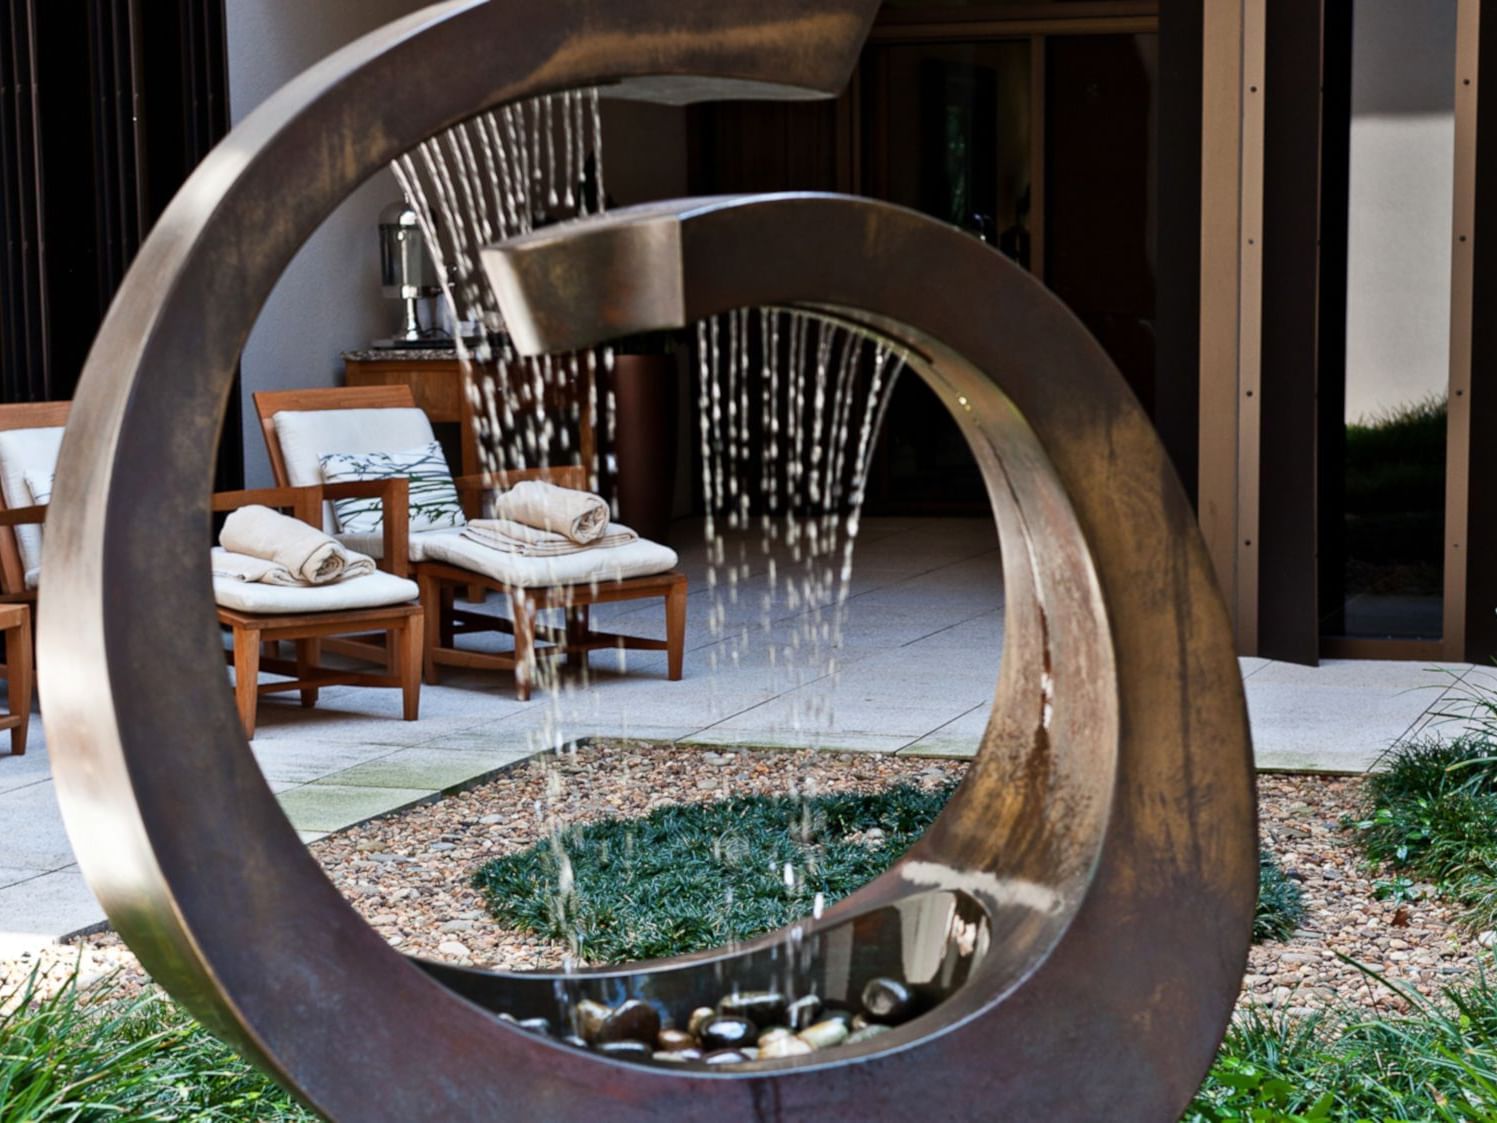 Relaxing water fountain in the Meditation Garden area at The Umstead Hotel and Spa